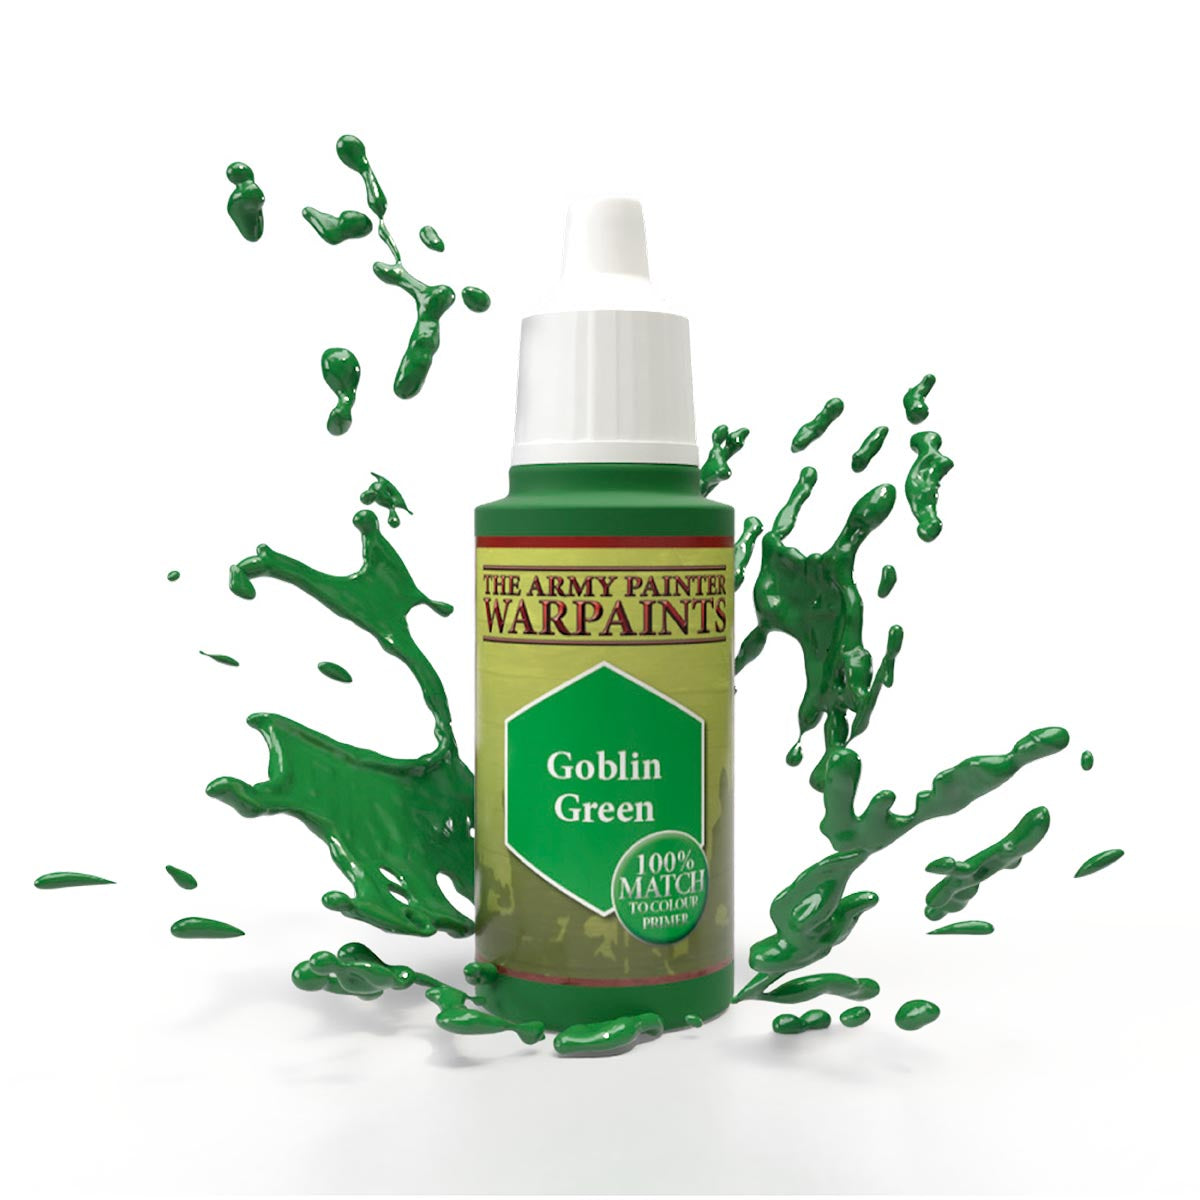 WP1109 Goblin Green Army Painter Acrylic Warpaints Paint